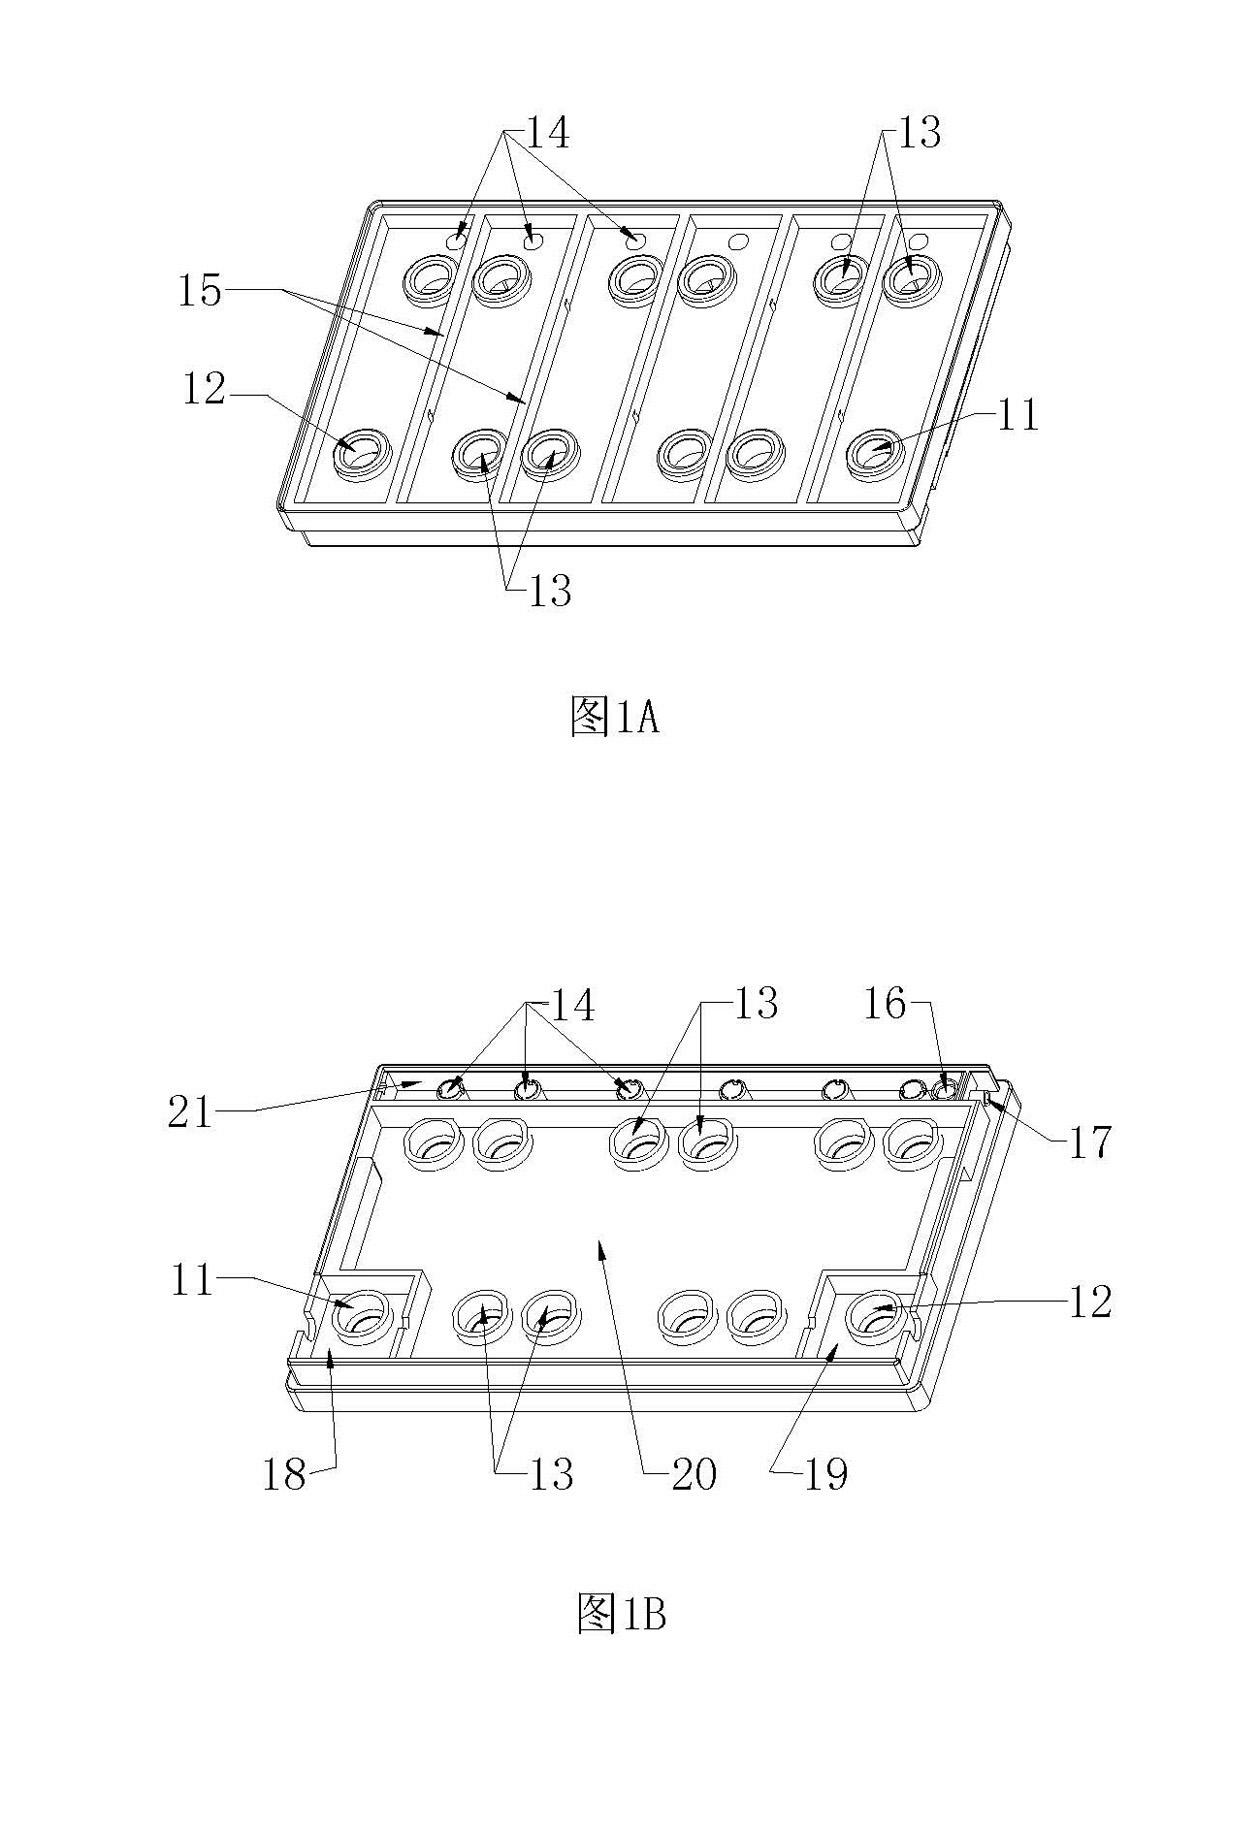 Valve-controlled sealed lead-acid accumulator for electric vehicle